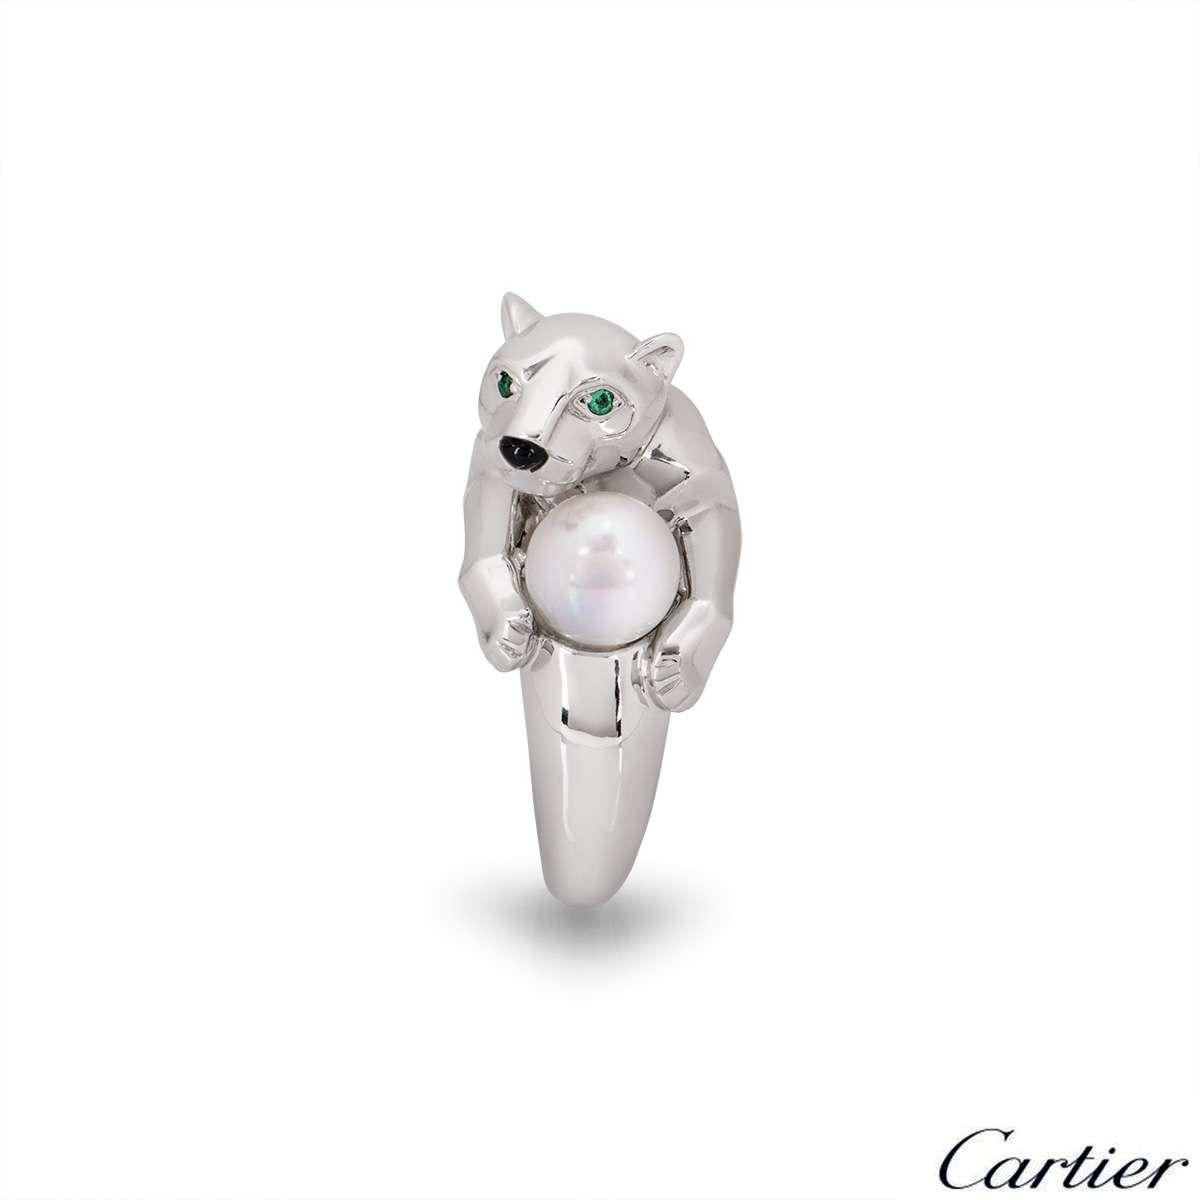 A unique 18k white gold Panthere ring by Cartier. The ring features a Panthere's head with two emeralds set to the eyes and onyx for the nose. The Panthere is clutching a cultured pearl between the paws. The ring size is a UK L / EU 51 / US 6 and